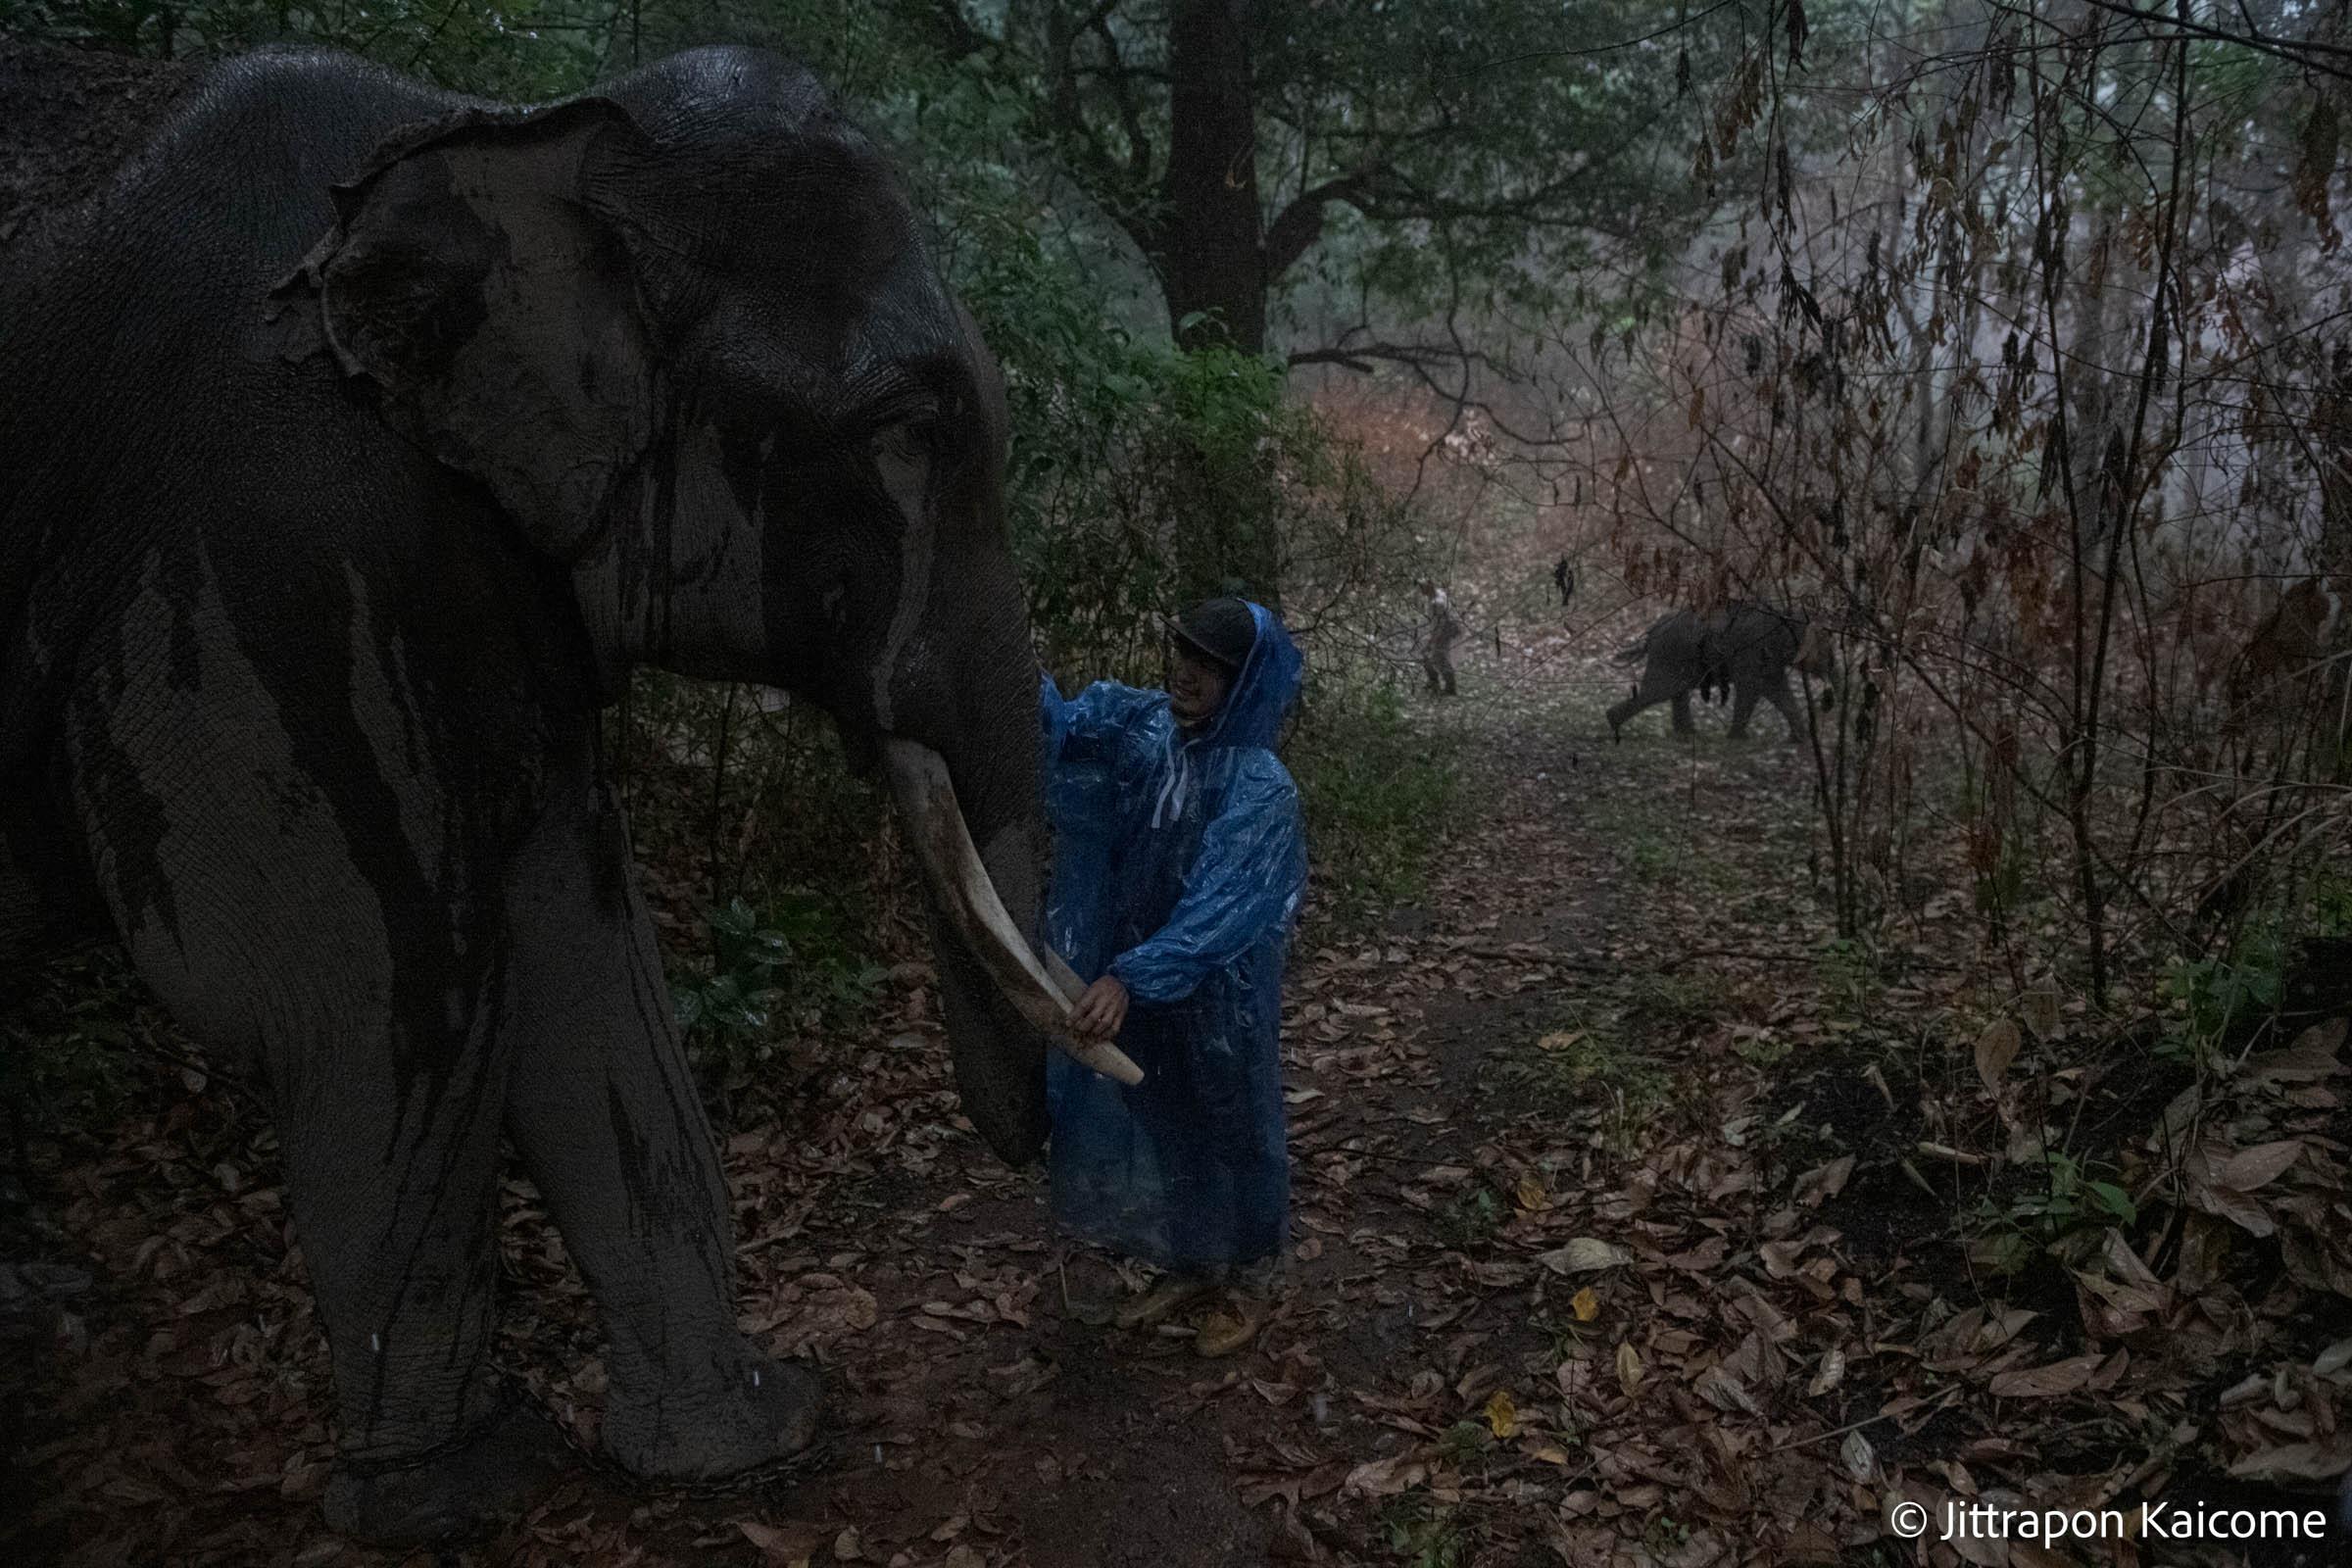 The Unexpected Change - In the pouring rain, a mahout comforts his elephants...